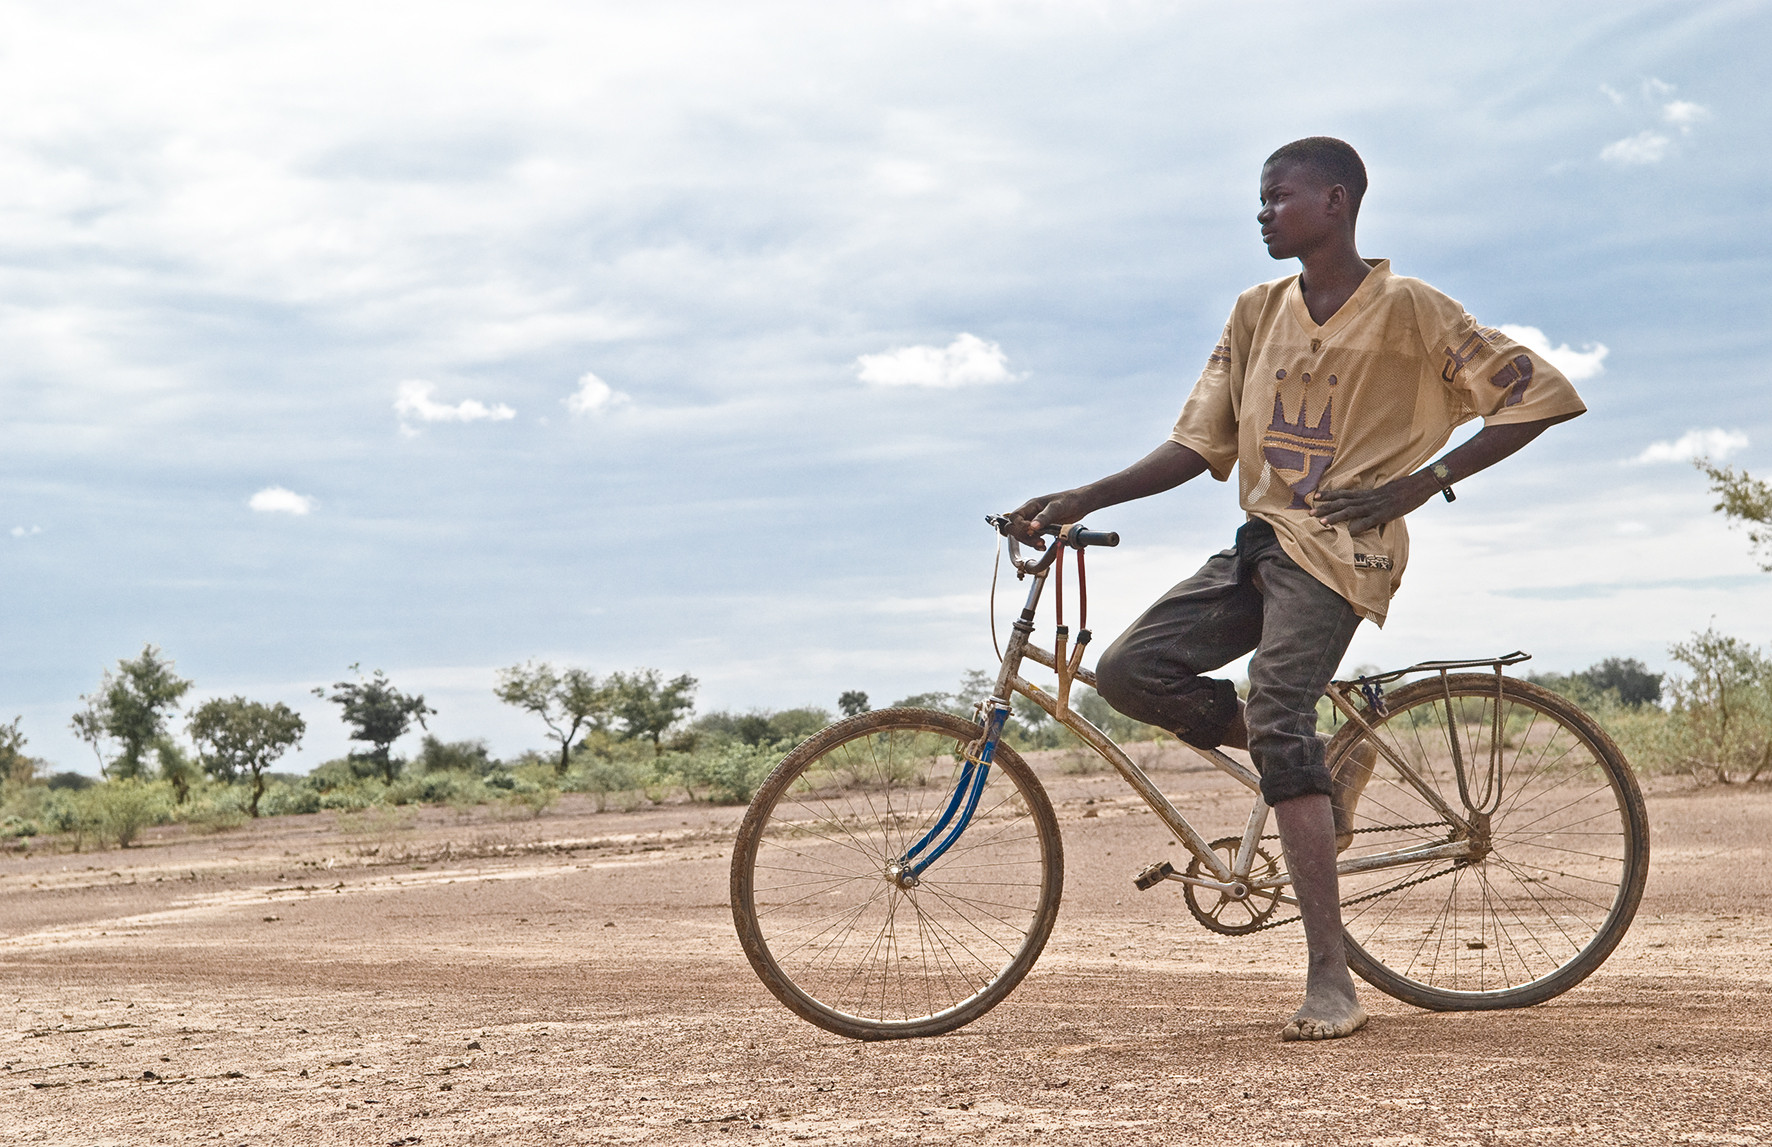 Boy in Burkina Fasos sitting on a bicycle and looking into African landscape.